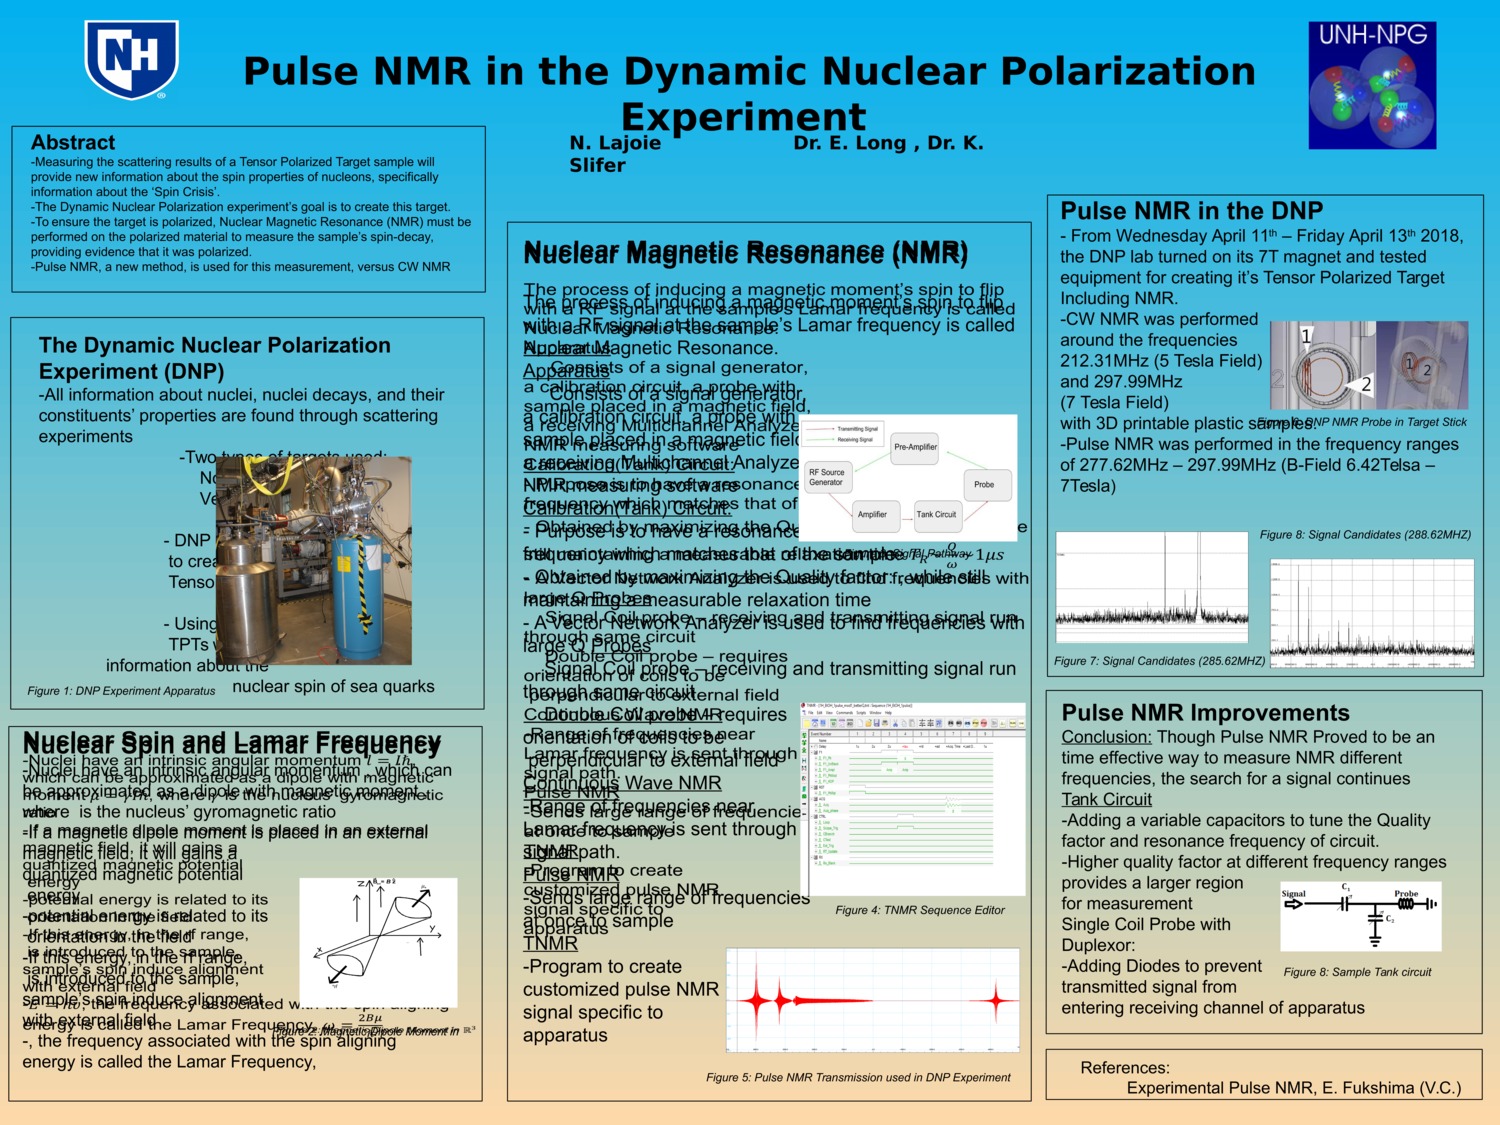 Pulse Nmr In The Dynamic Nuclear Polarization Experiment  by njl2000